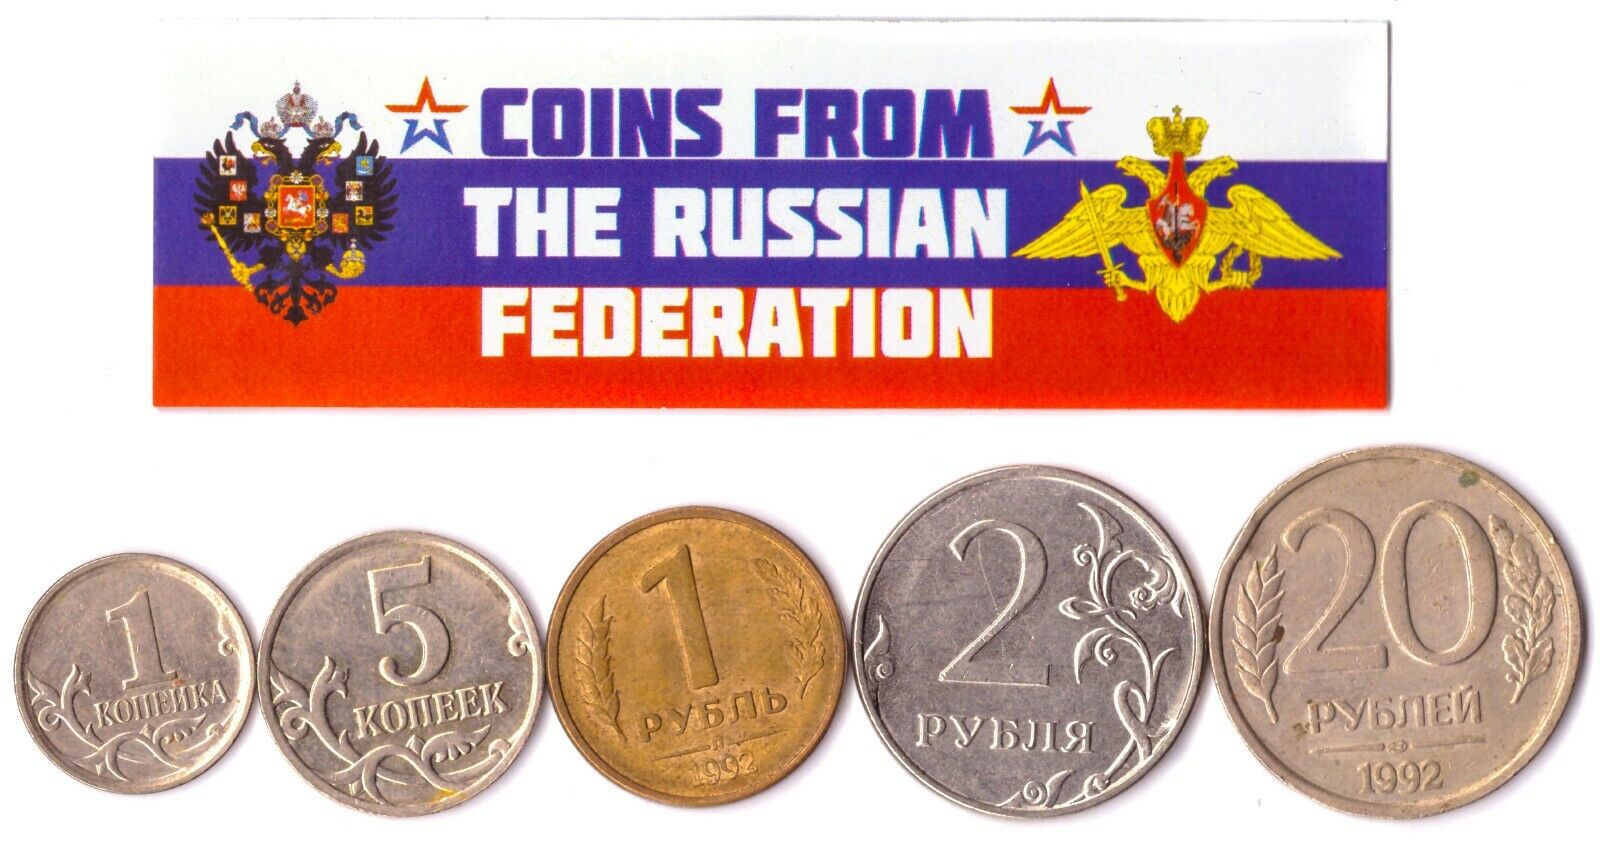 5 RUSSIAN FEDERATION COINS DIFFERENT EUROPEAN COINS FOREIGN CURRENCY, MONEY Без бренда - фотография #2